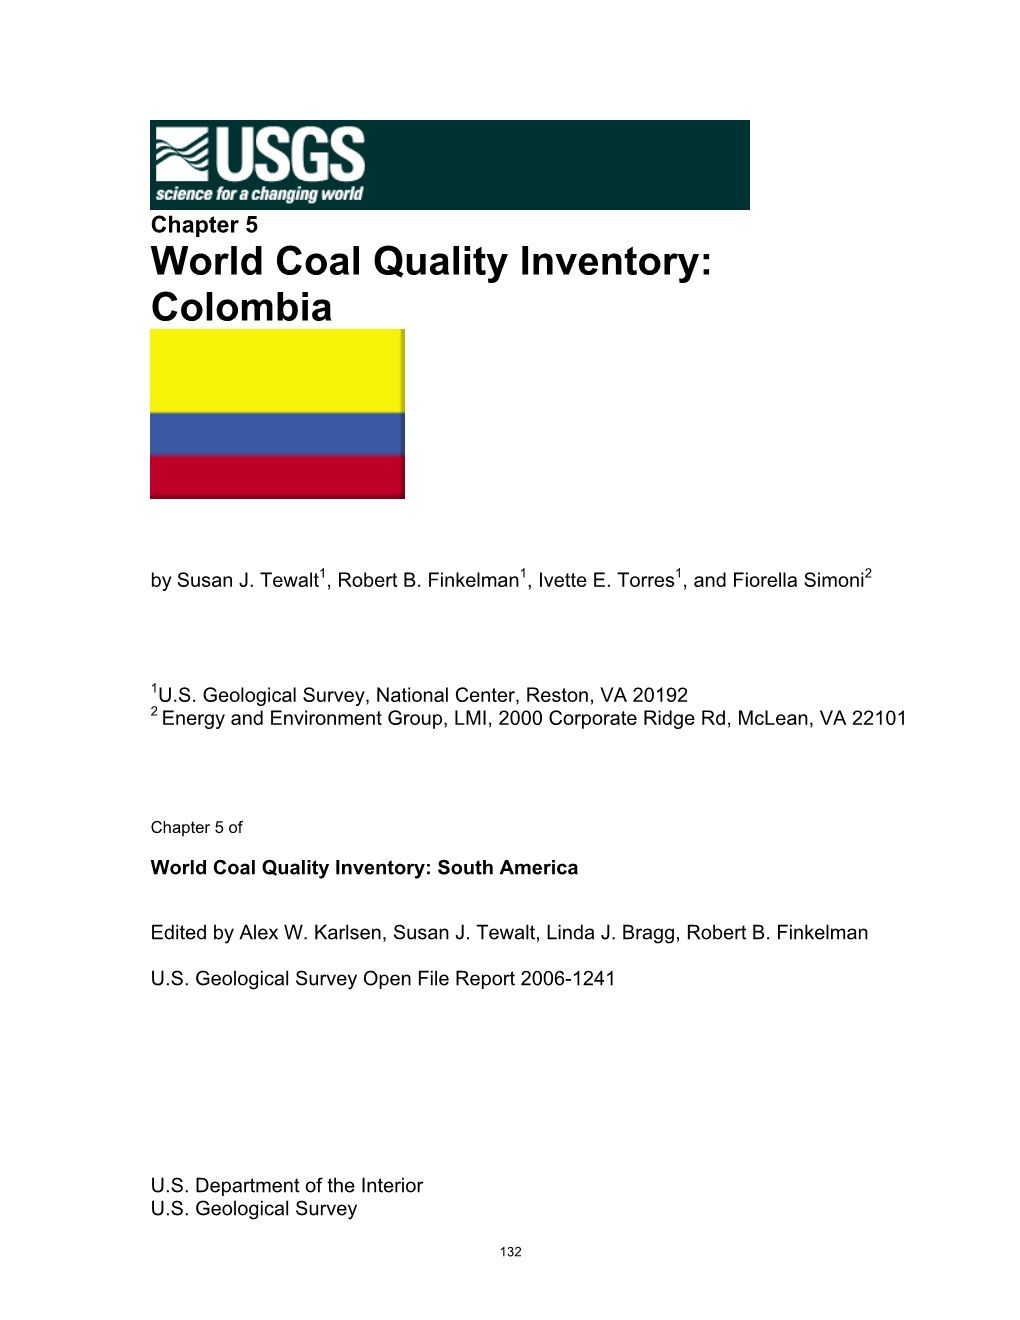 World Coal Quality Inventory: Colombia